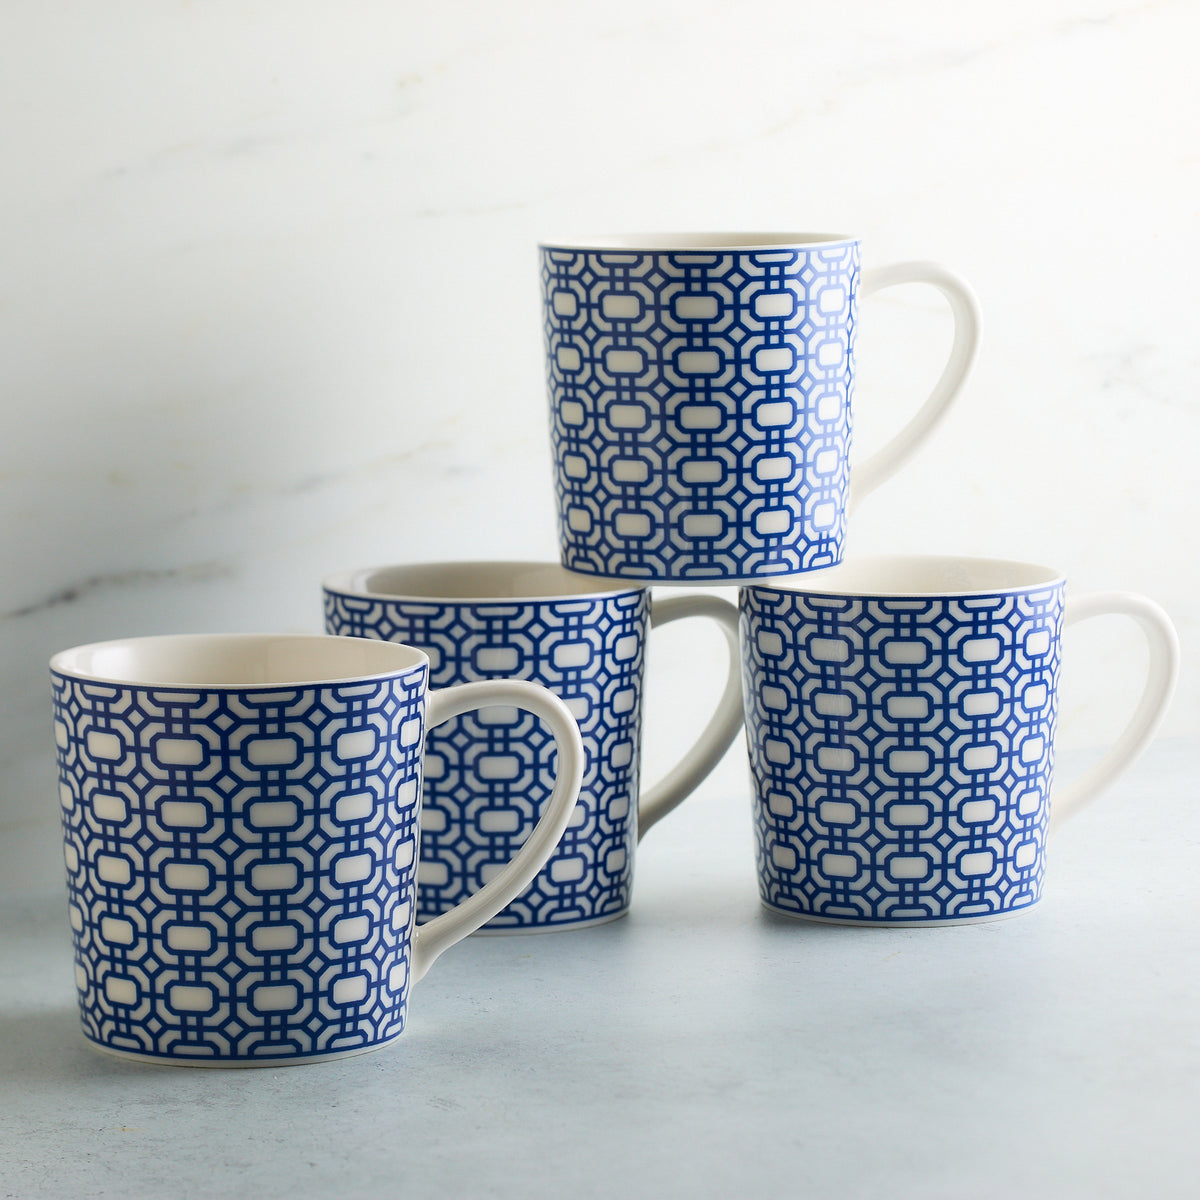 Four creamy white Newport Garden Gate Mugs by Caskata Artisanal Home with blue geometric patterns are stacked on a light gray surface against a light background. Dishwasher and microwave safe, these graphic mugs add a touch of elegance to any kitchen.